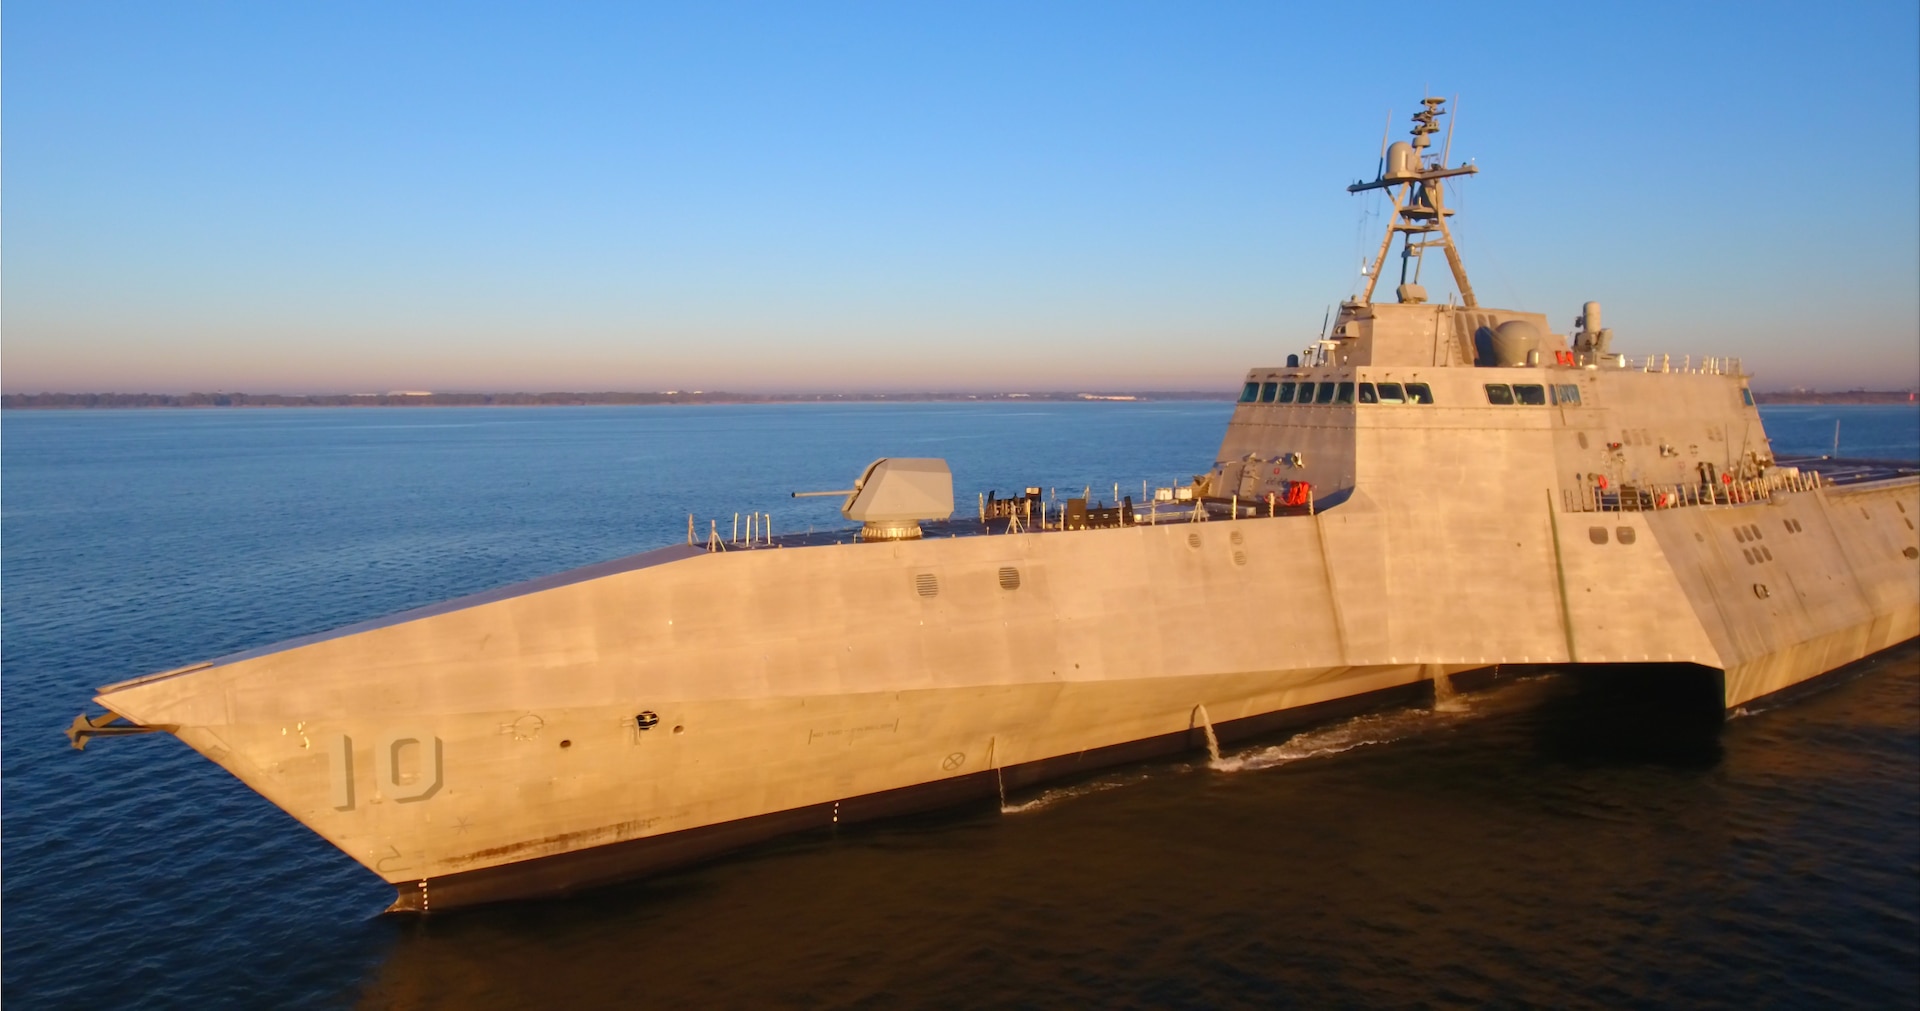 The future USS Gabrielle Giffords (LCS 10) conducts acceptance trials in the Gulf of Mexico, Nov. 17. Acceptance trials are the last significant milestone before delivery of the ship to the Navy, which is planned for later this year. 
